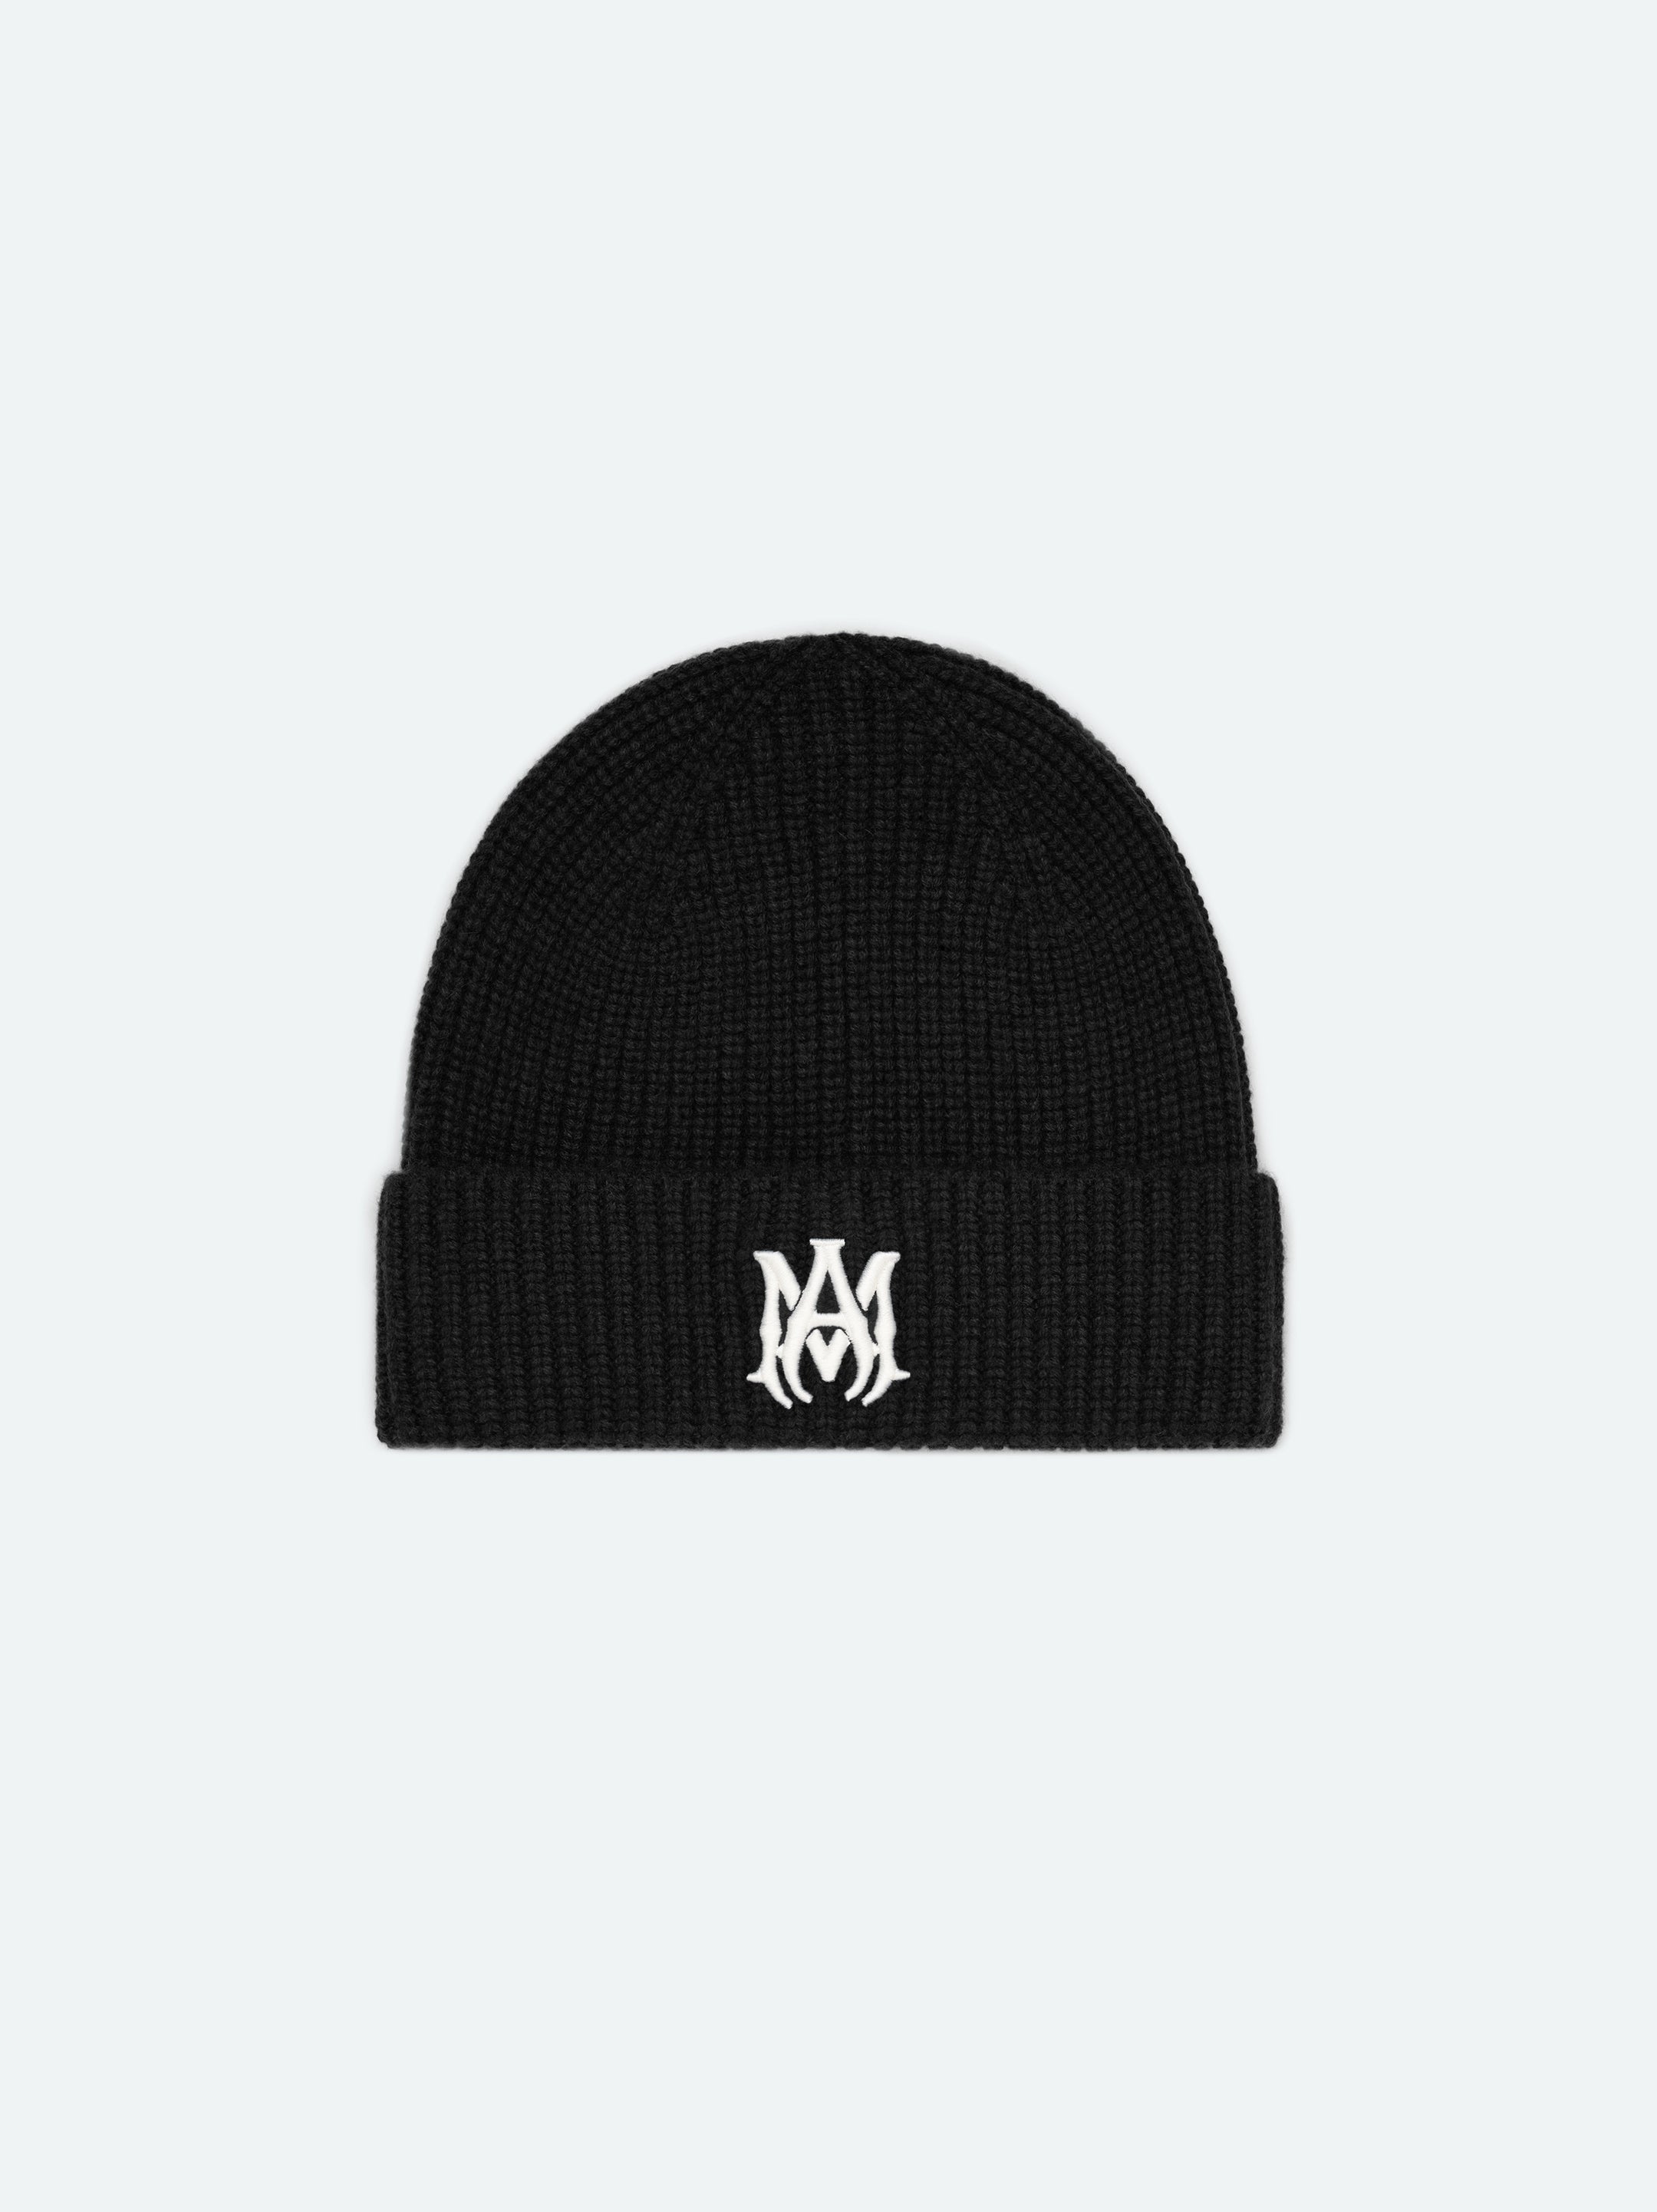 Product MA BEANIE - Black featured image